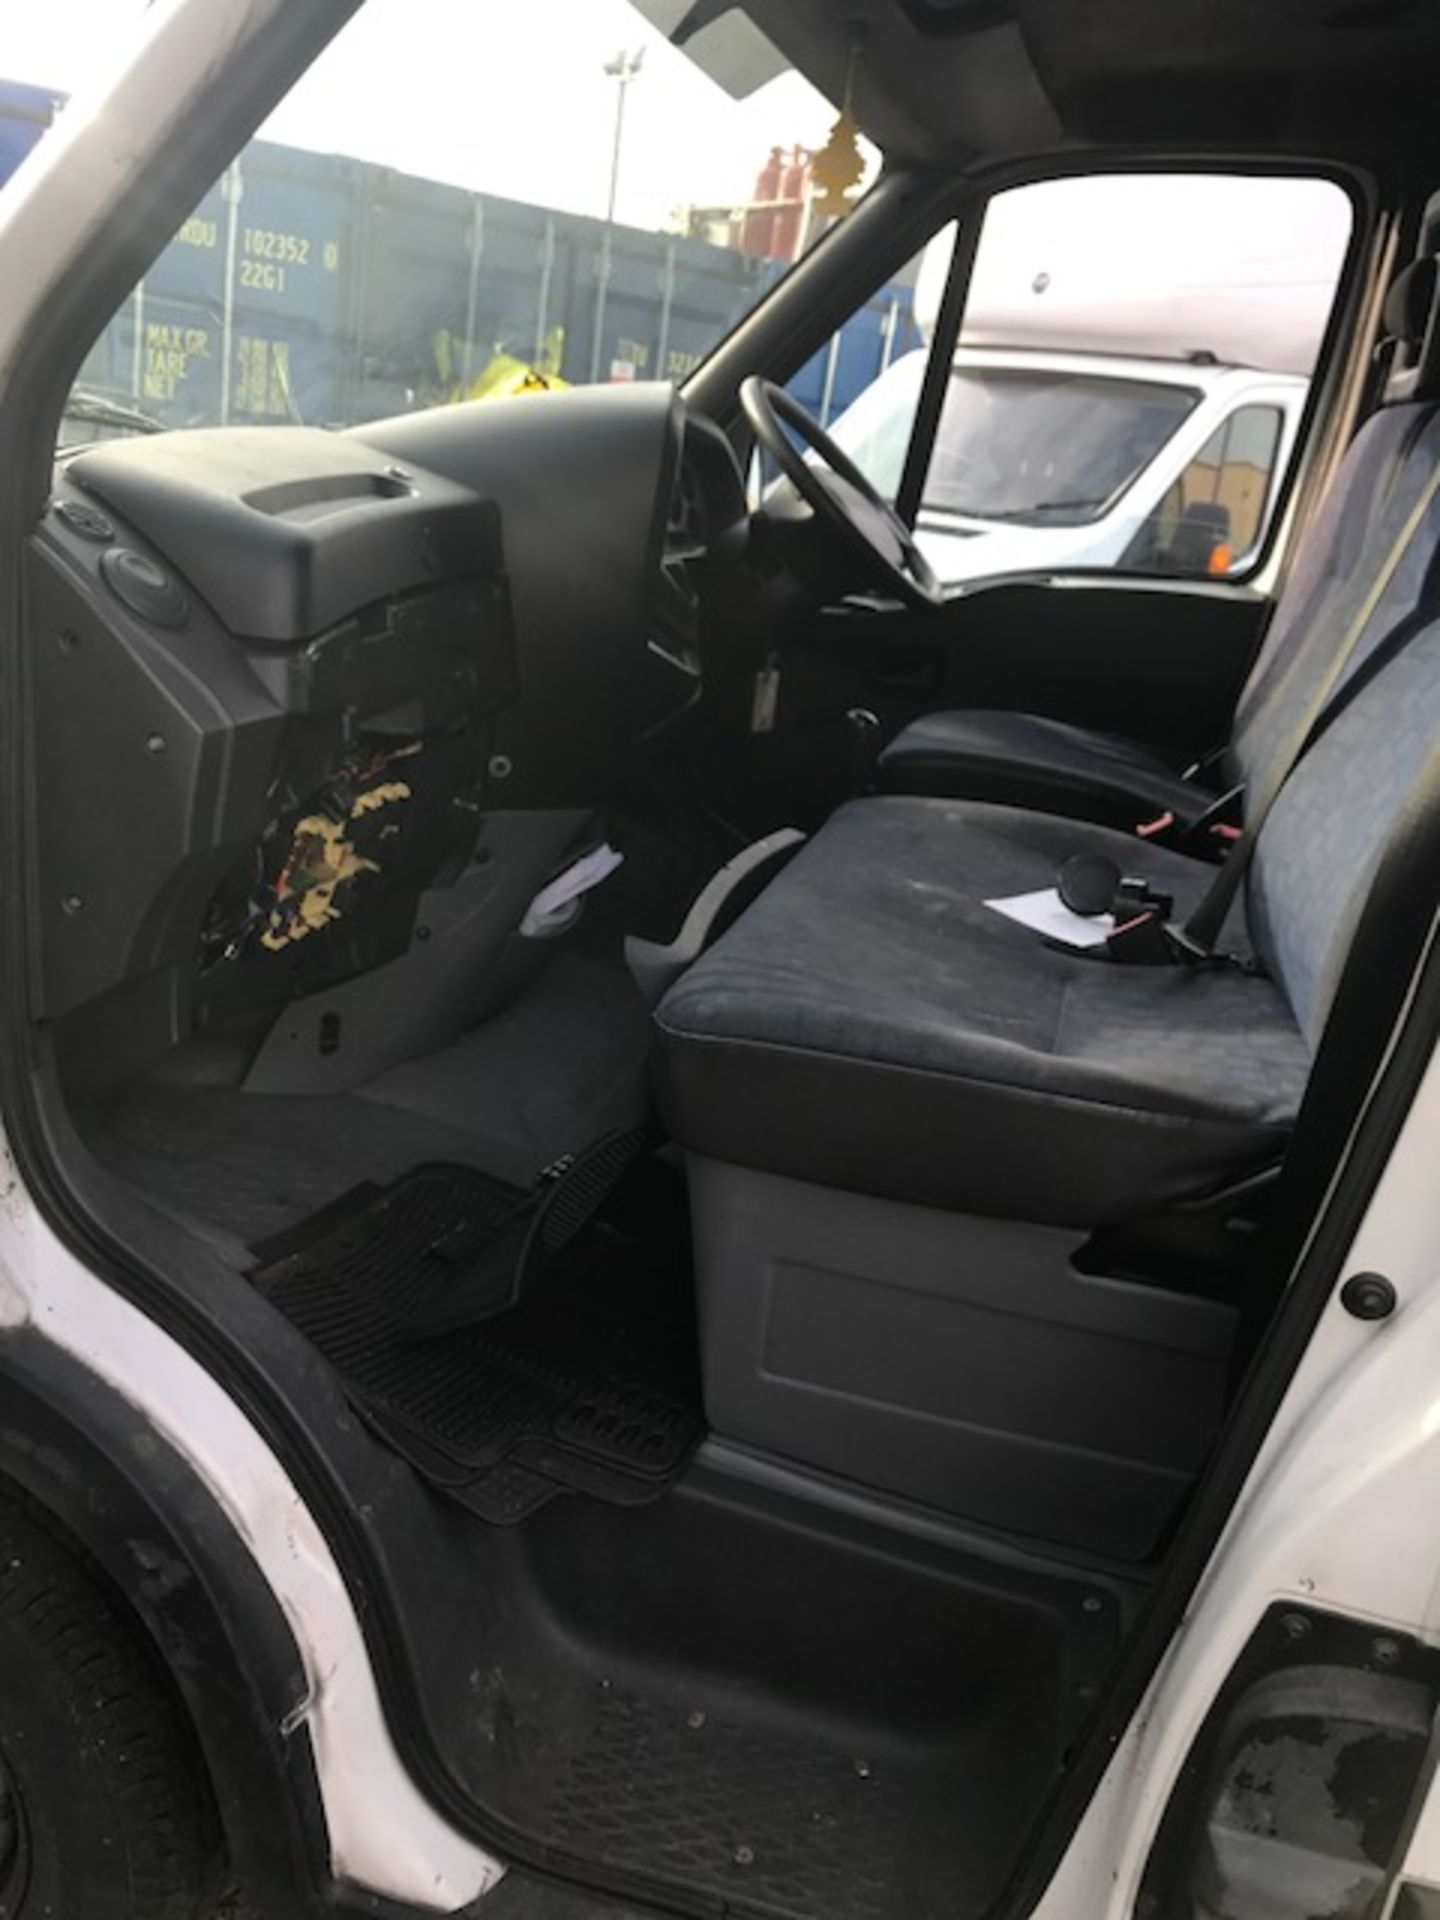 2005 Iveco Daily 35C15 MWB panel van complete with Anderson jump-start sockets Registration: CN54 - Image 11 of 12